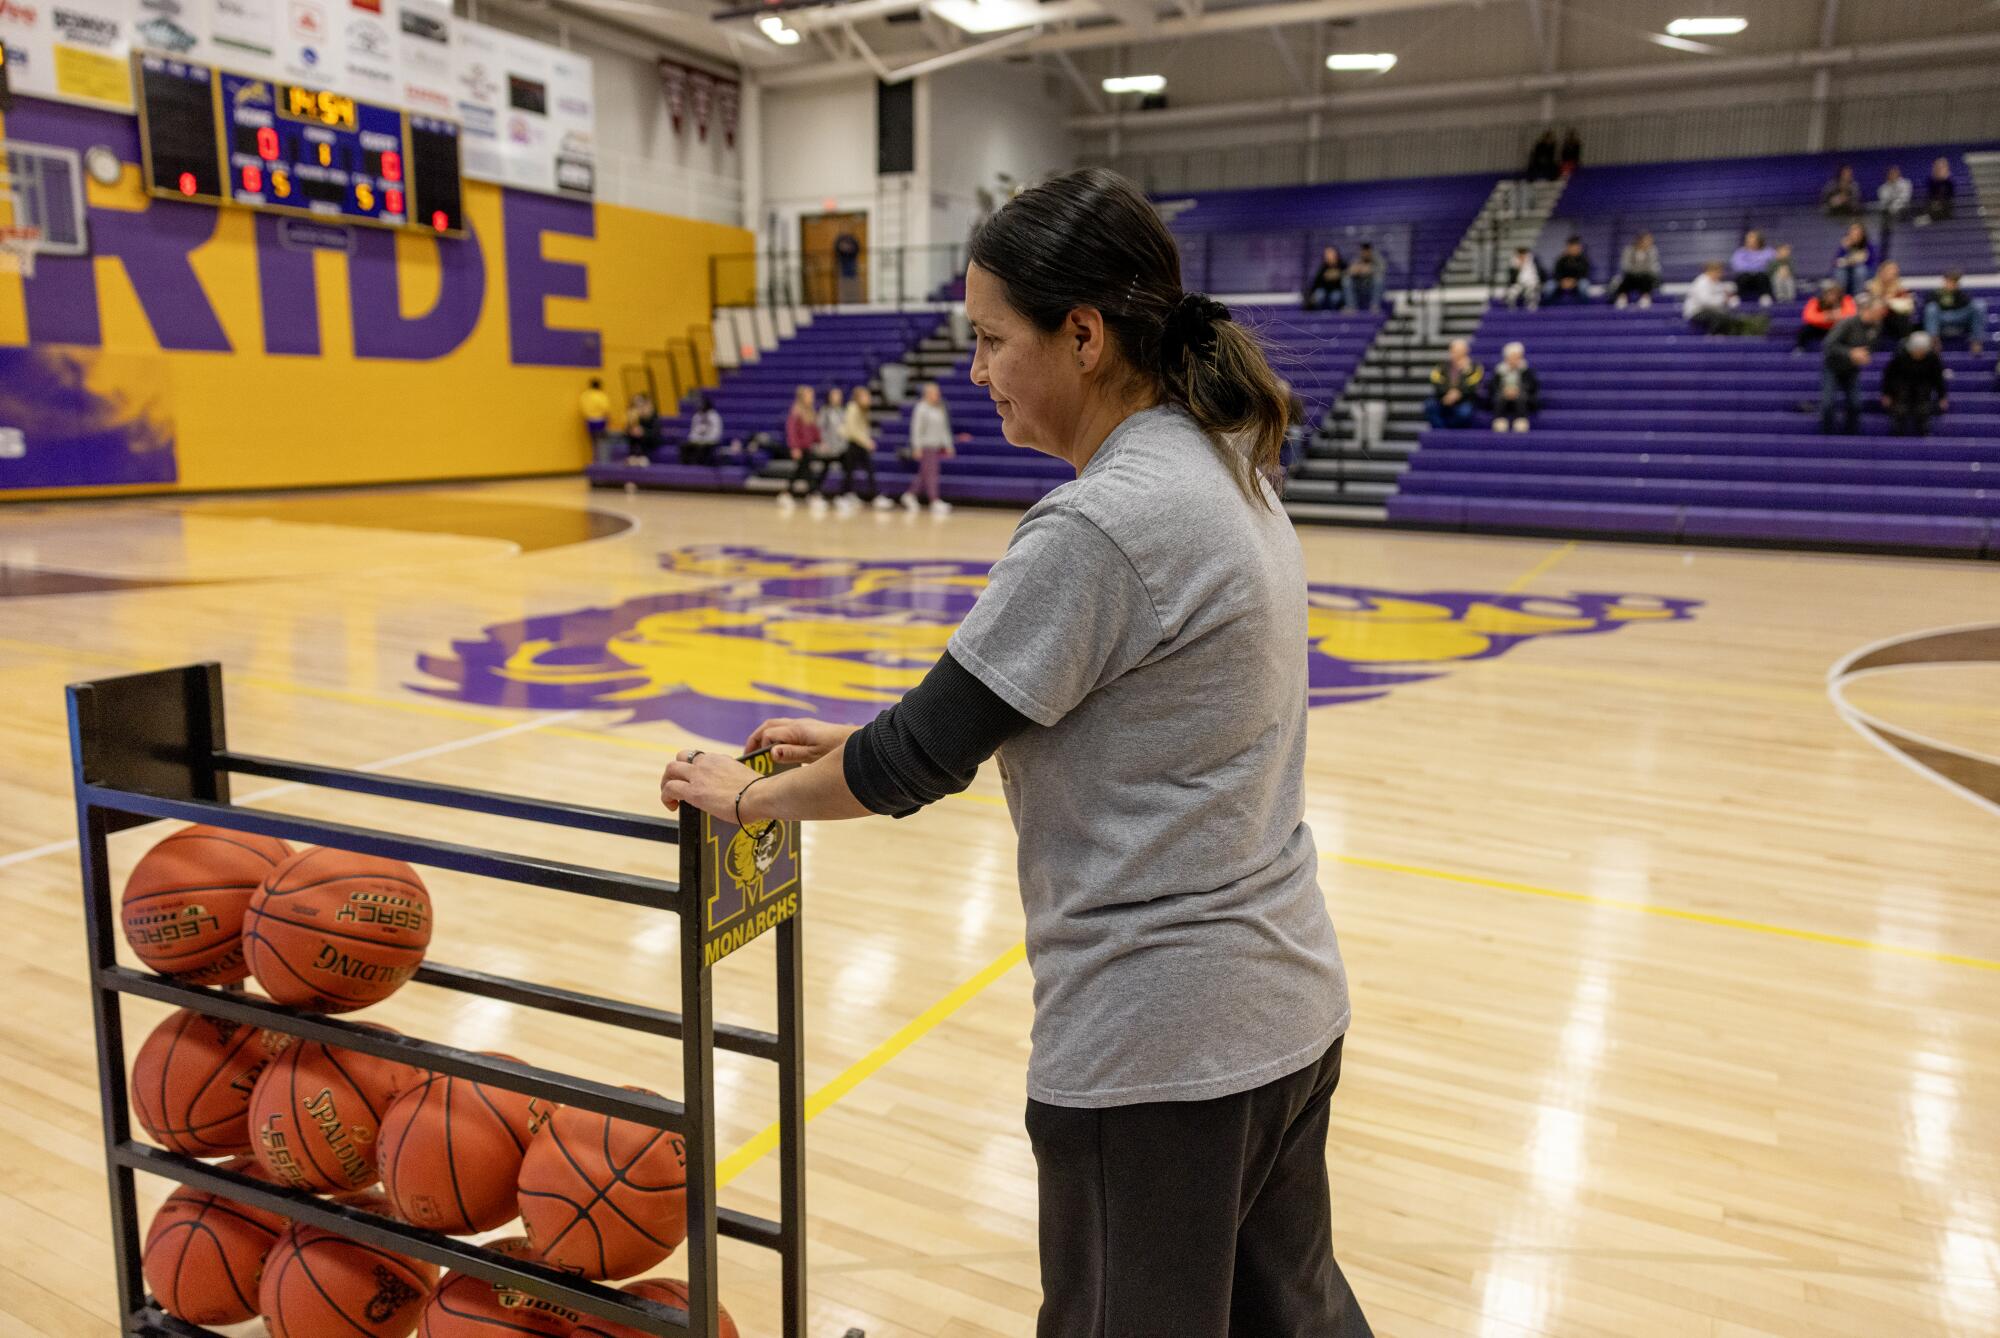 Vicenta Lira Cardenas rolls out the rack of basketballs in Denison, Iowa.